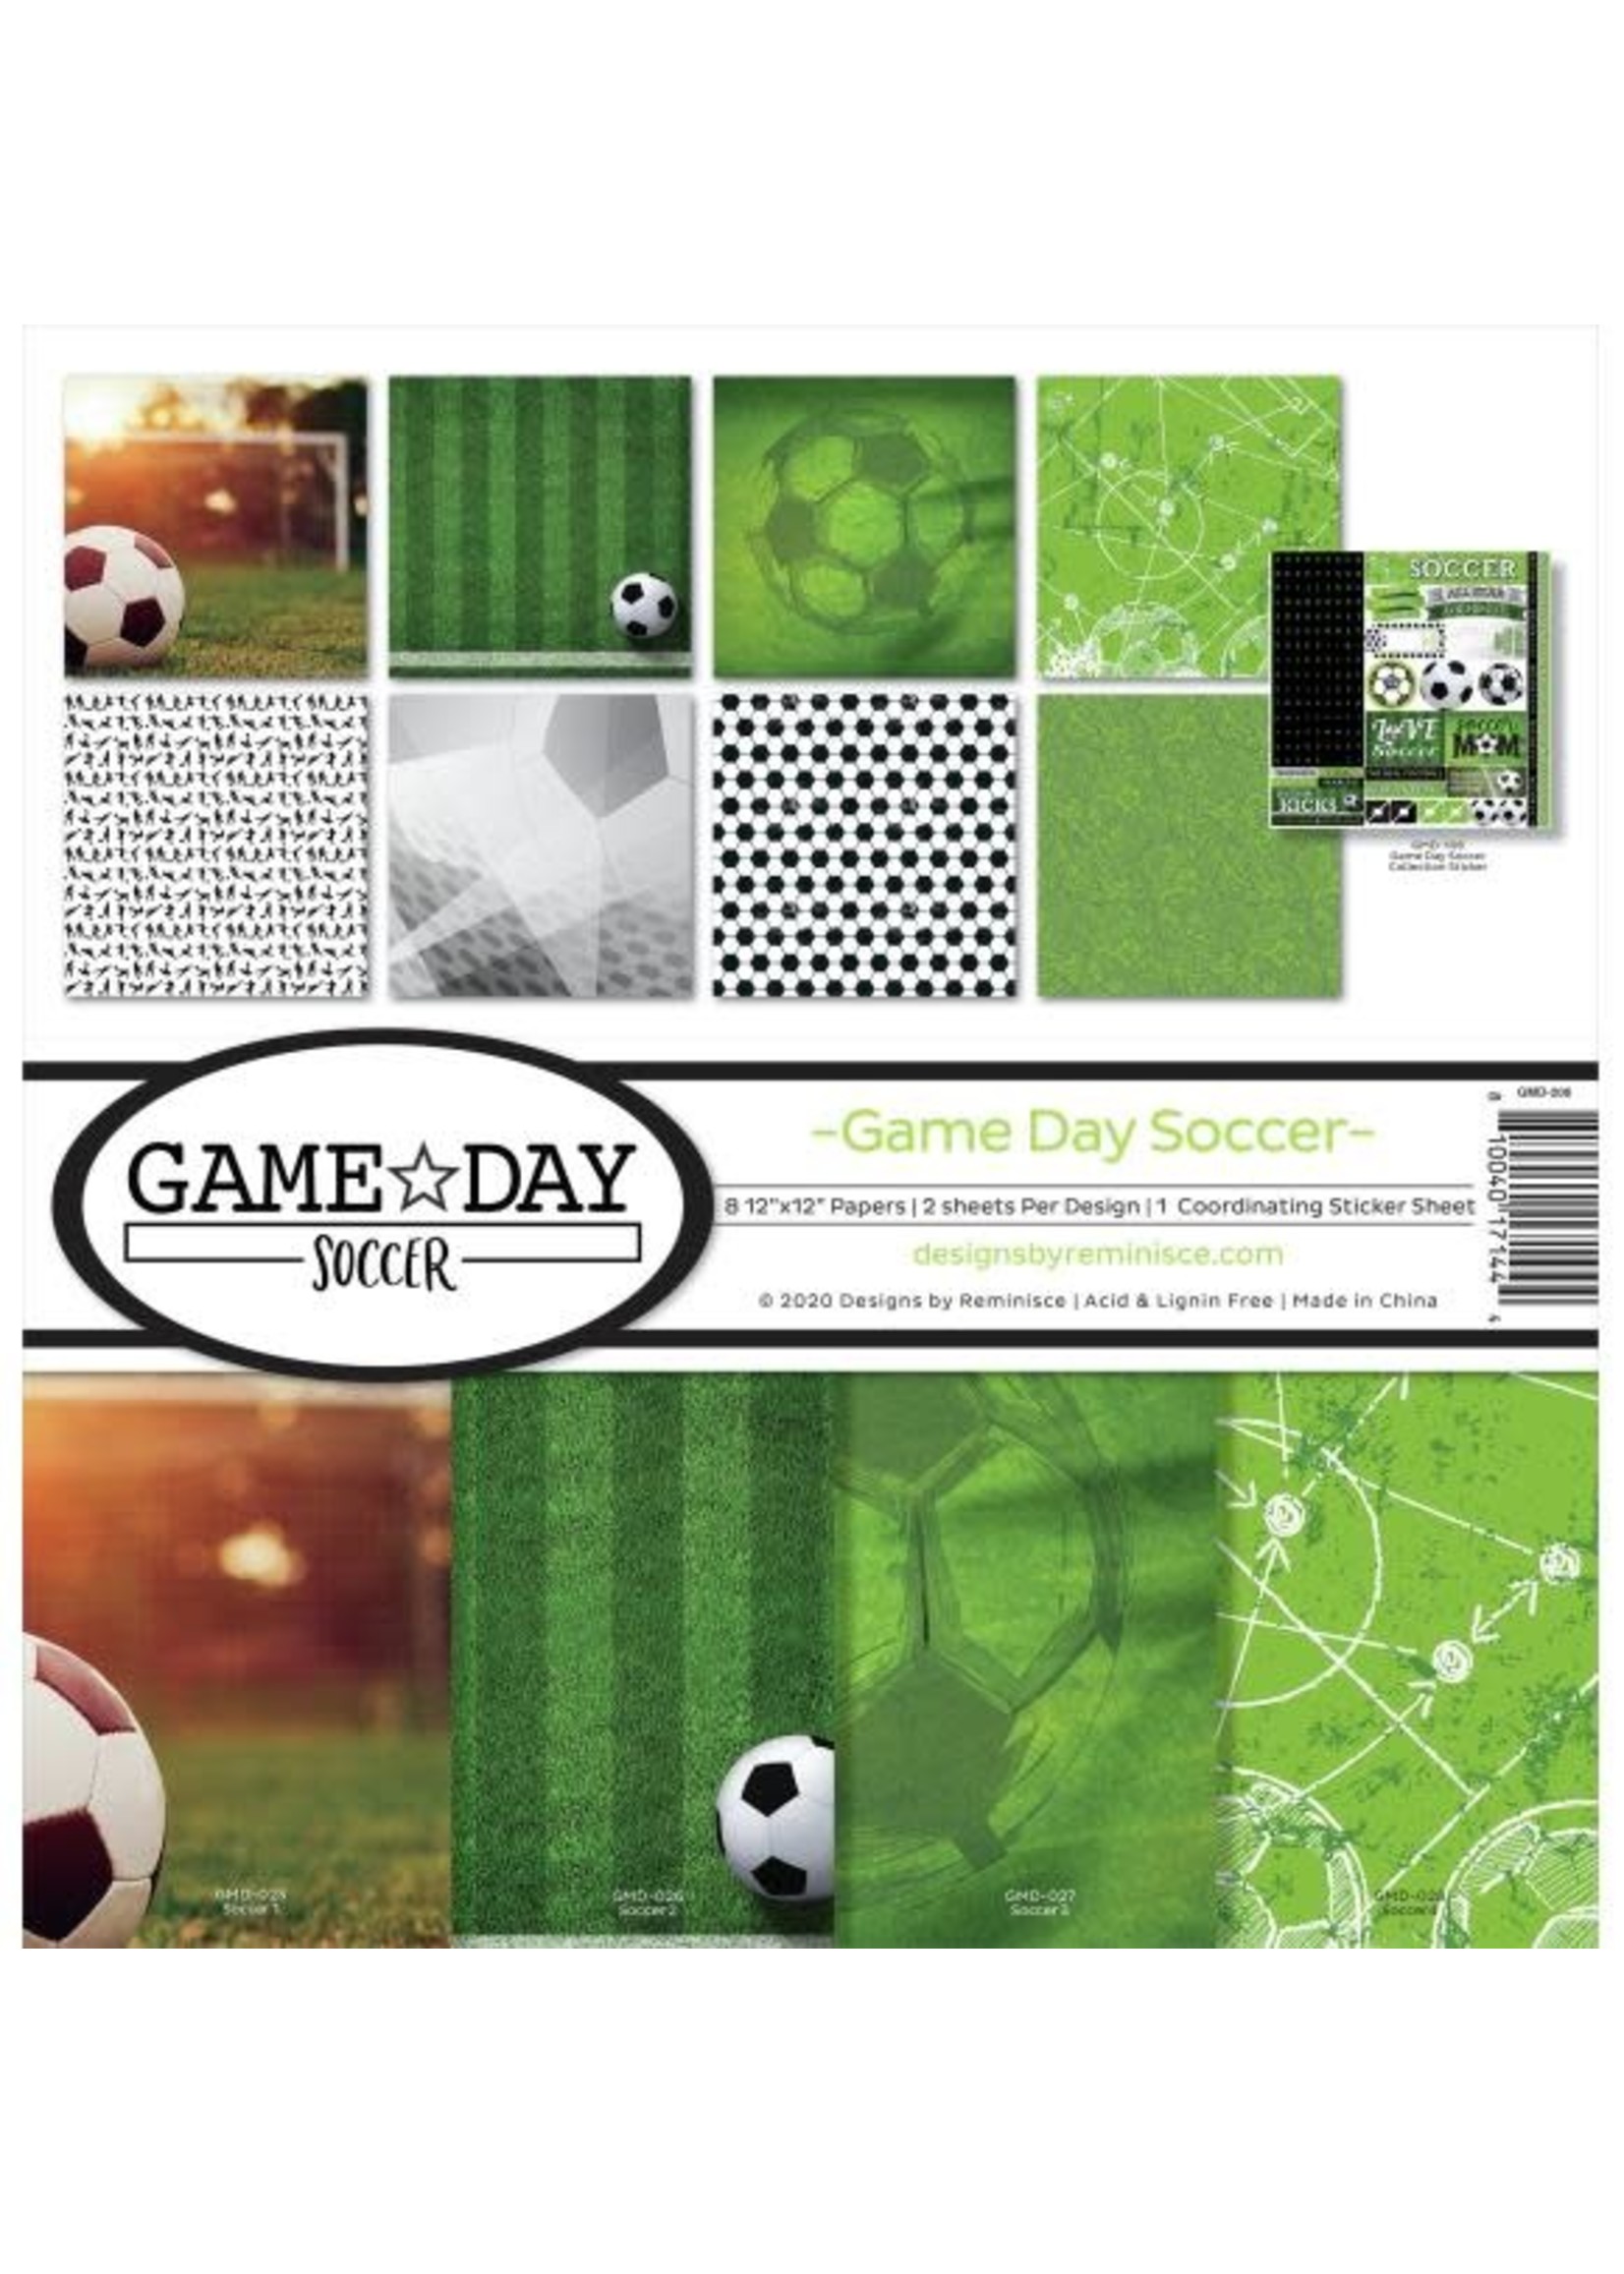 reminisce Game Day Soccer Collection Kit